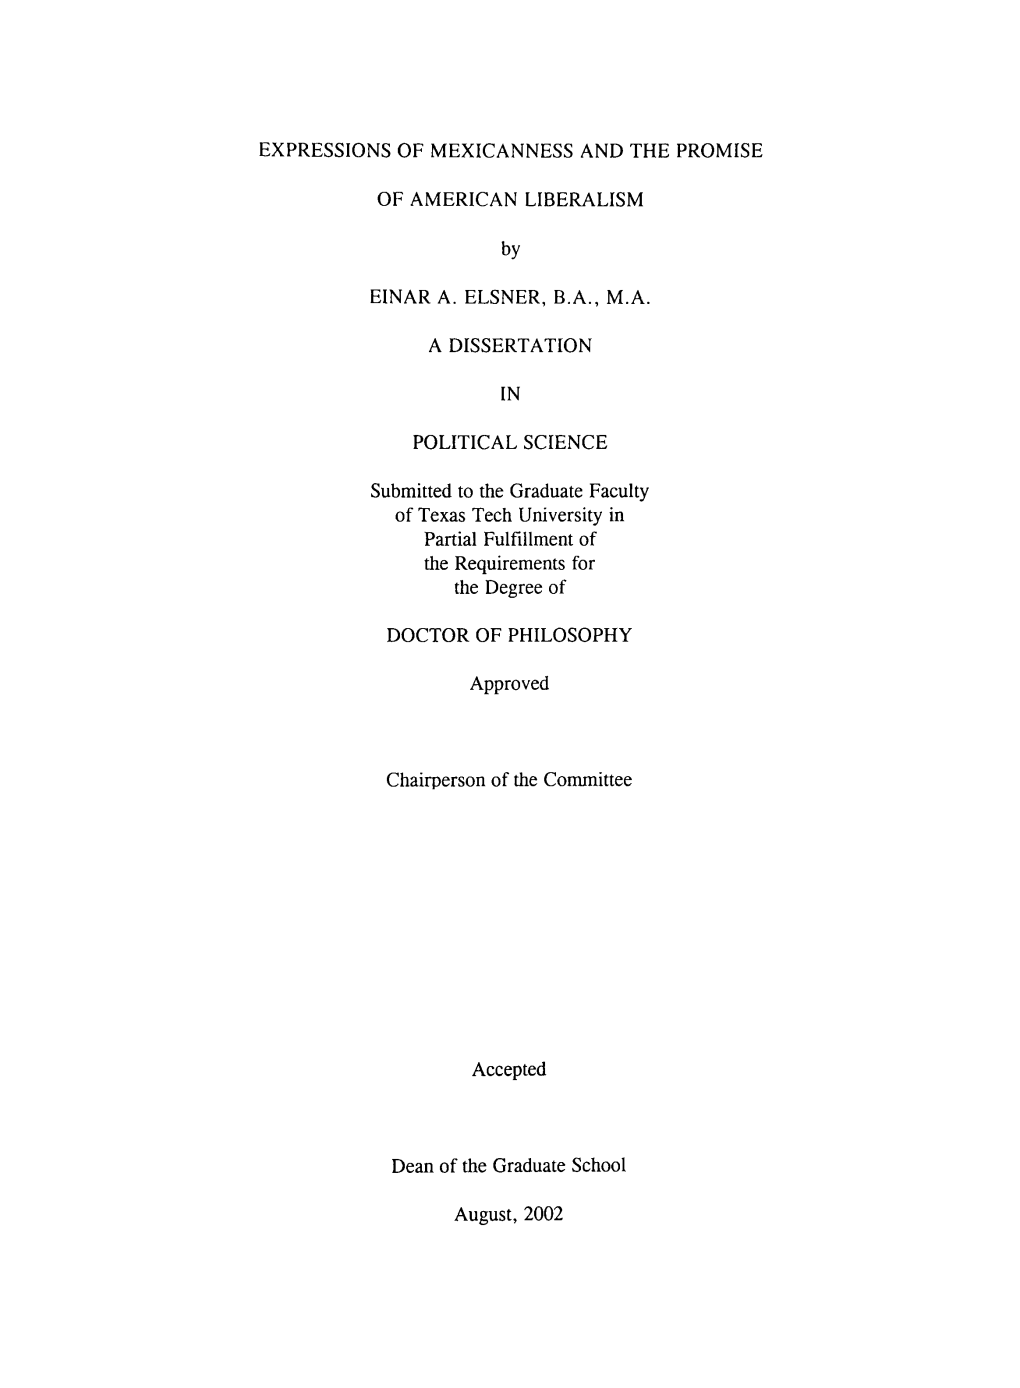 EXPRESSIONS of MEXICANNESS and the PROMISE of AMERICAN LIBERALISM by EINAR A. ELSNER, B.A., M.A. a DISSERTATION in POLITICAL